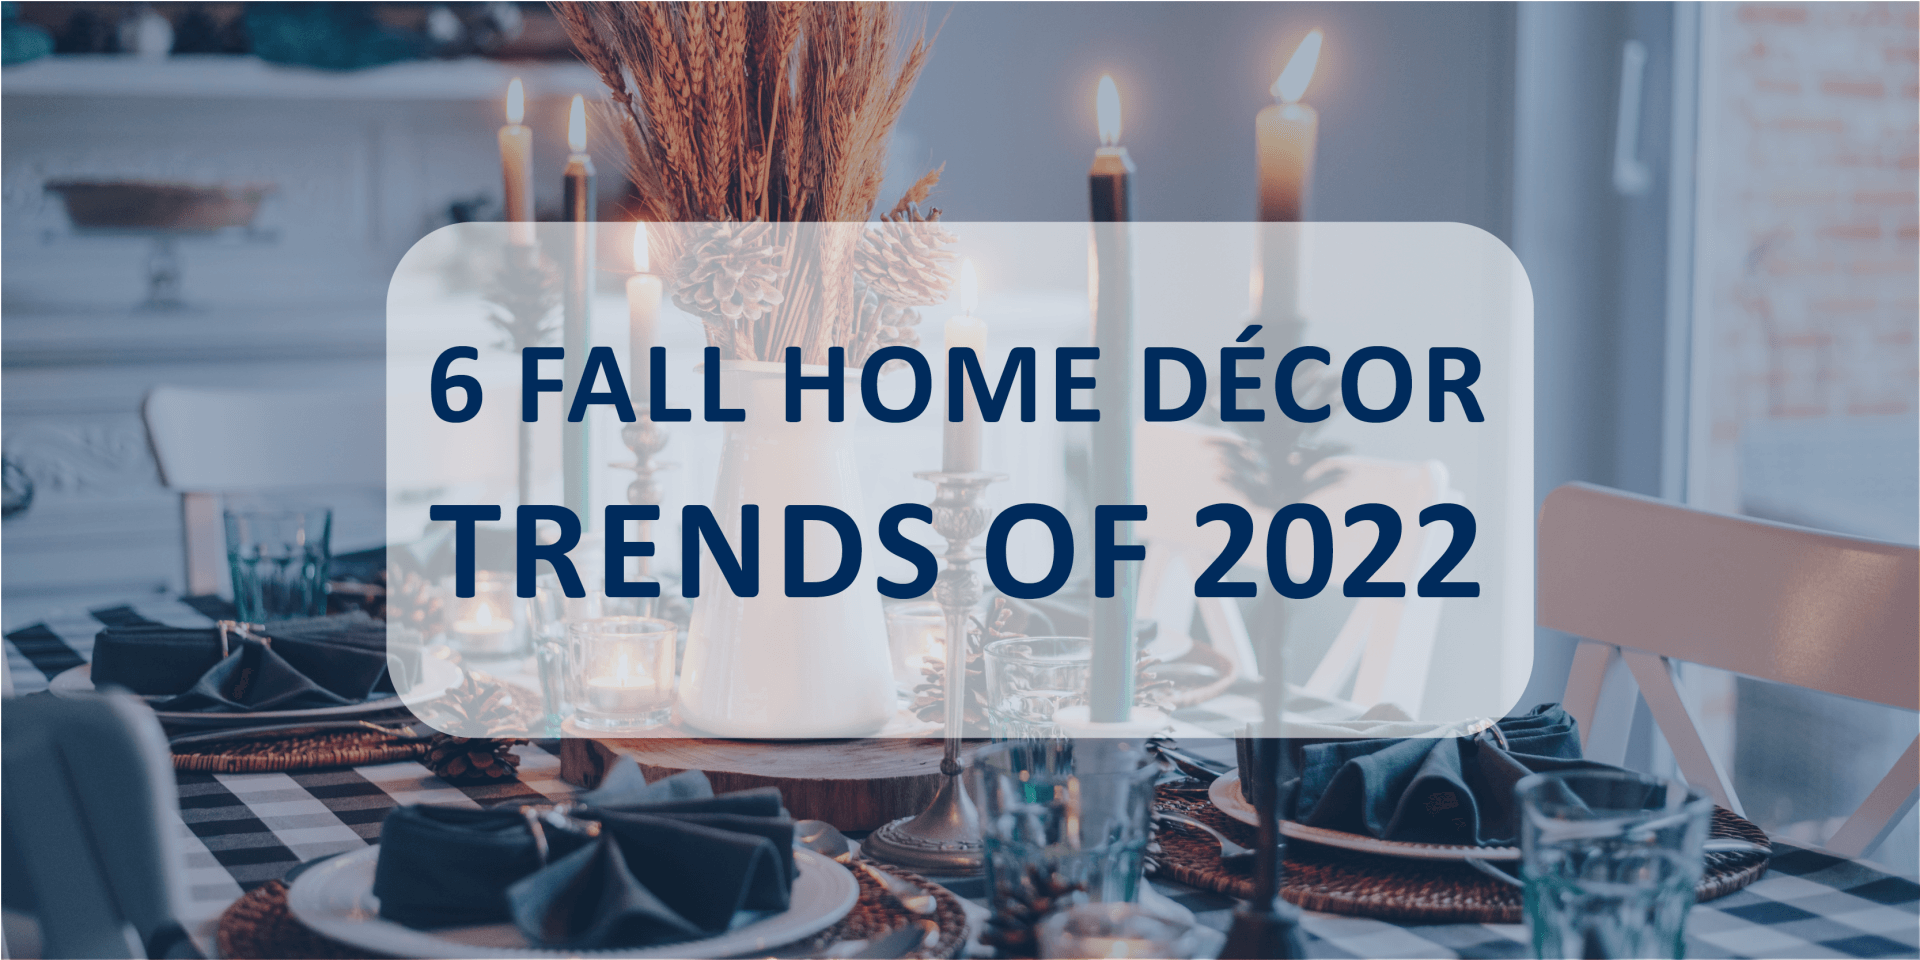 6 Fall Home Decor Trends of 2022